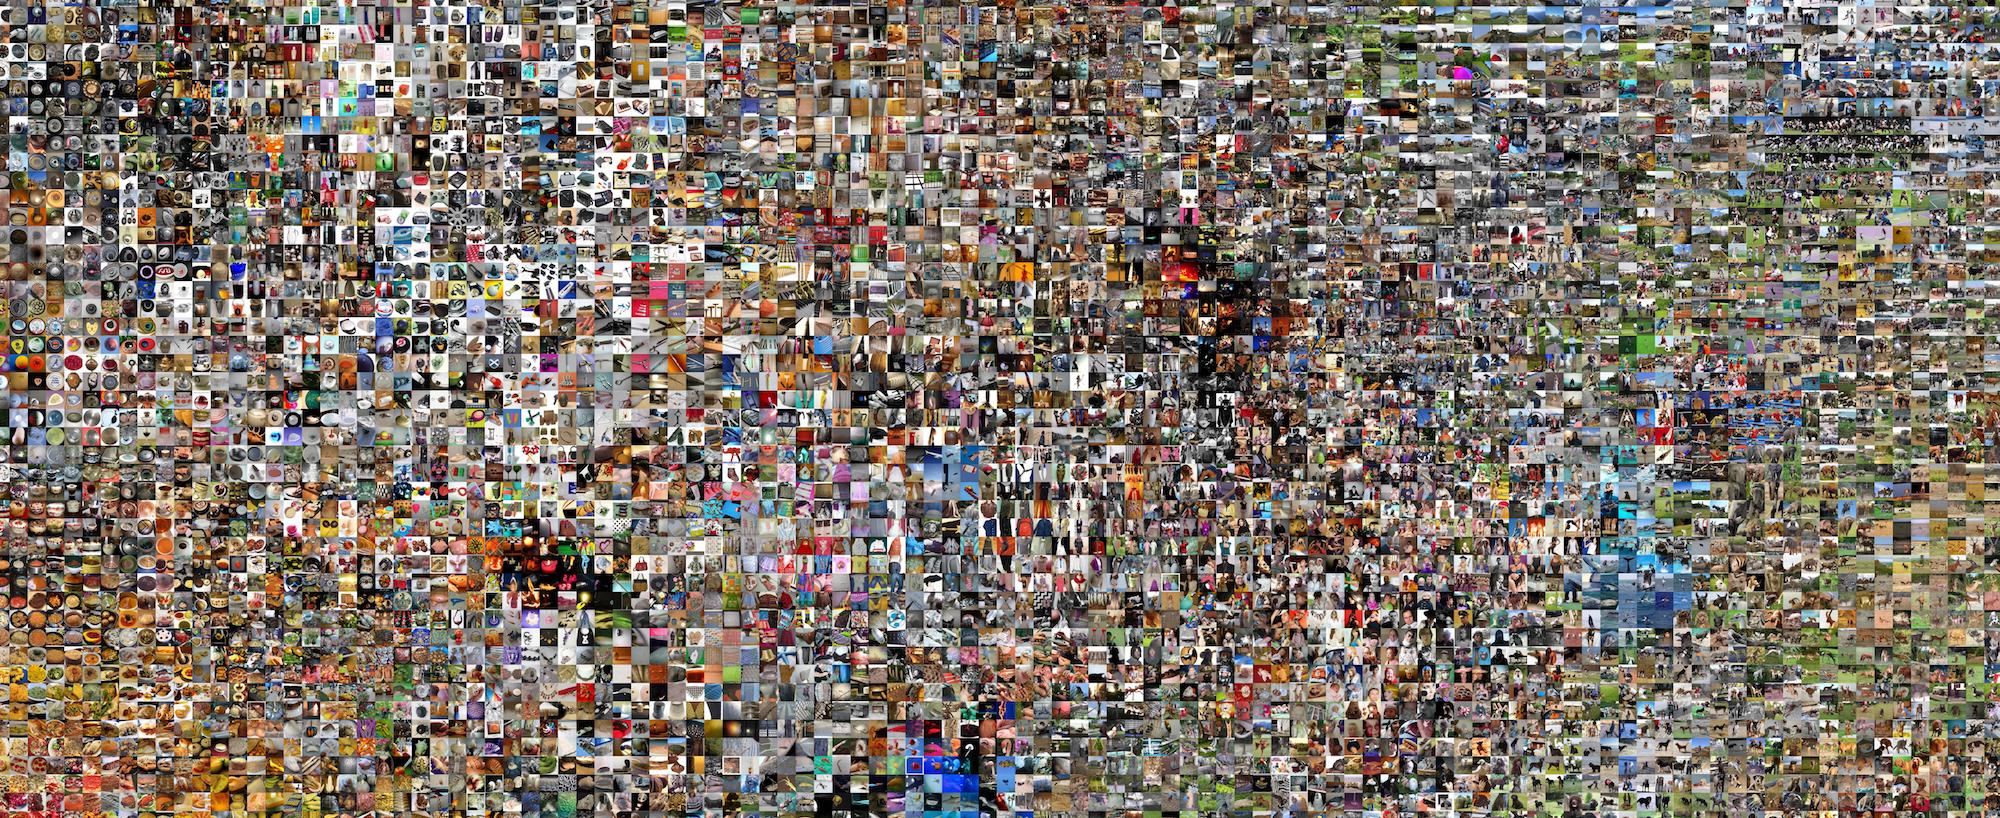 A gridded image collage of thousands of photographs